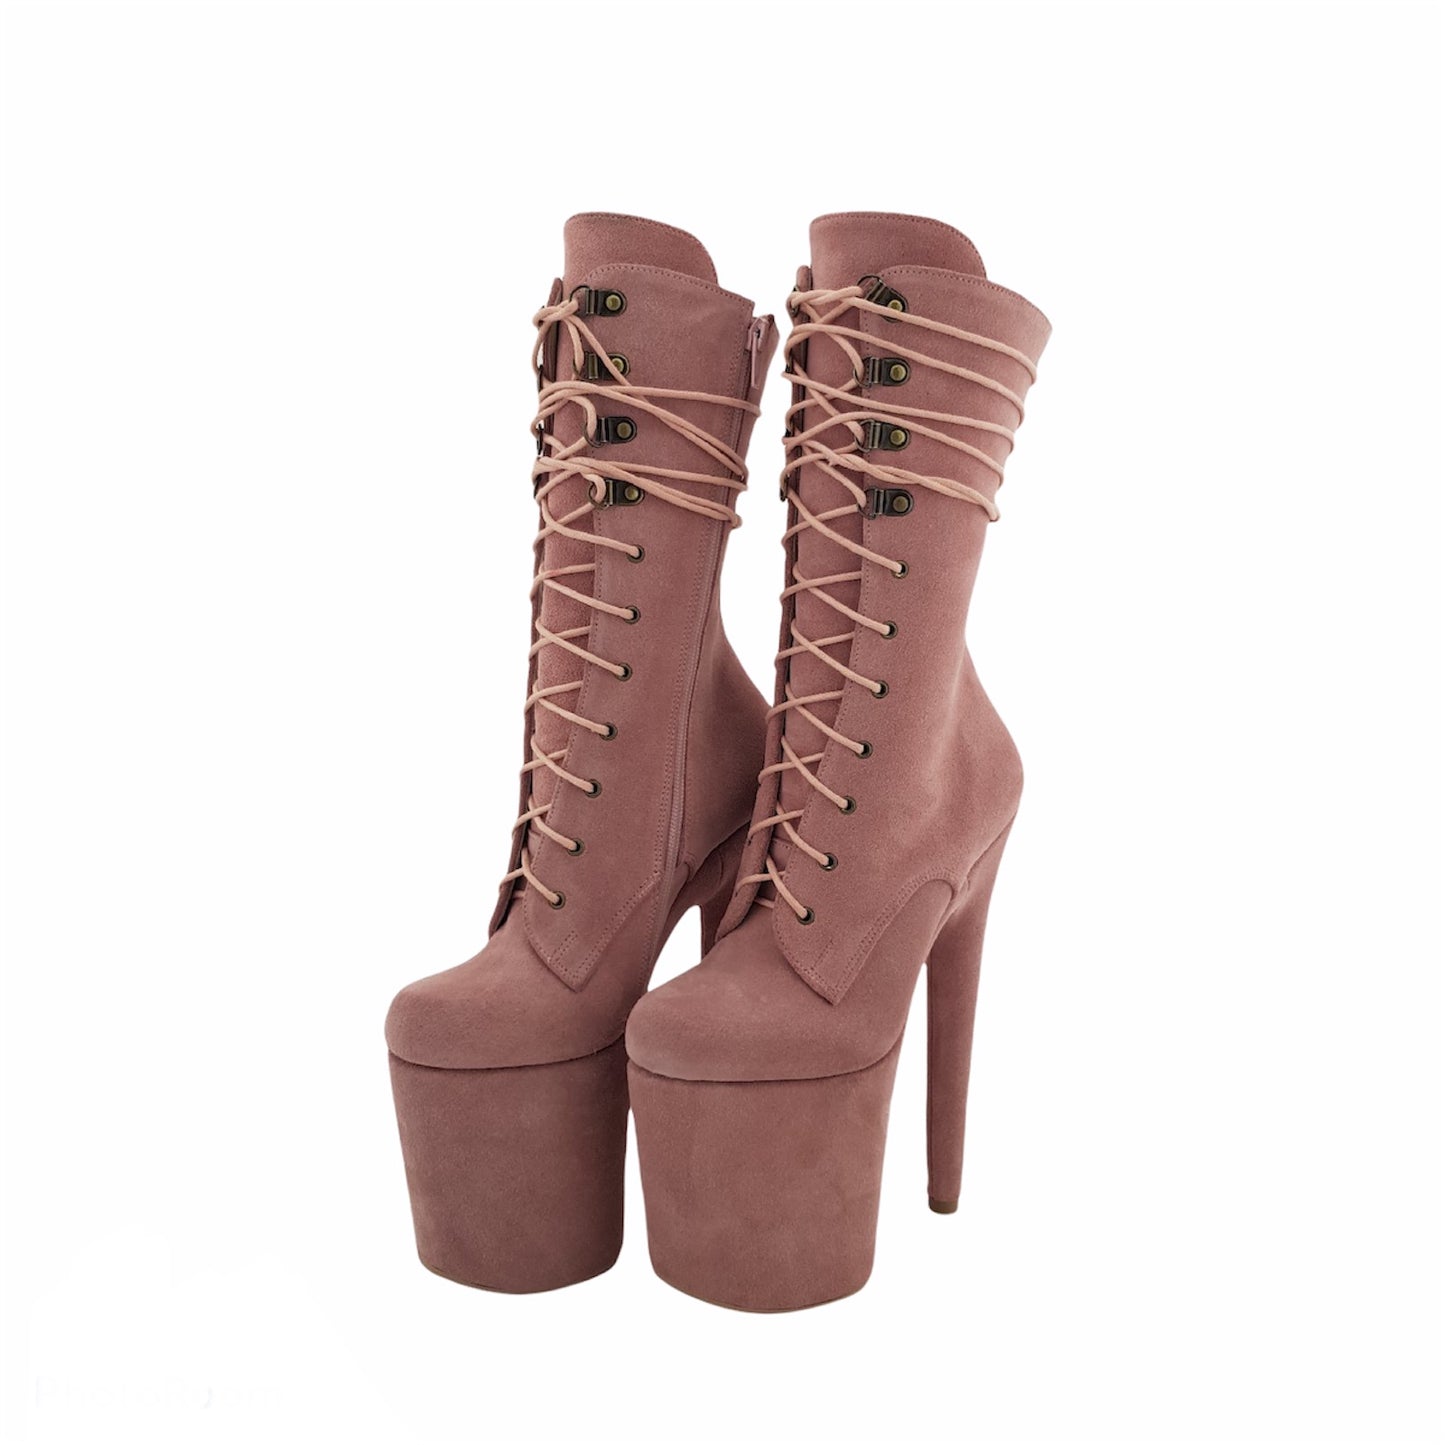 Peach Blush genuine suede ankle - mid calf boots(more colors are available)